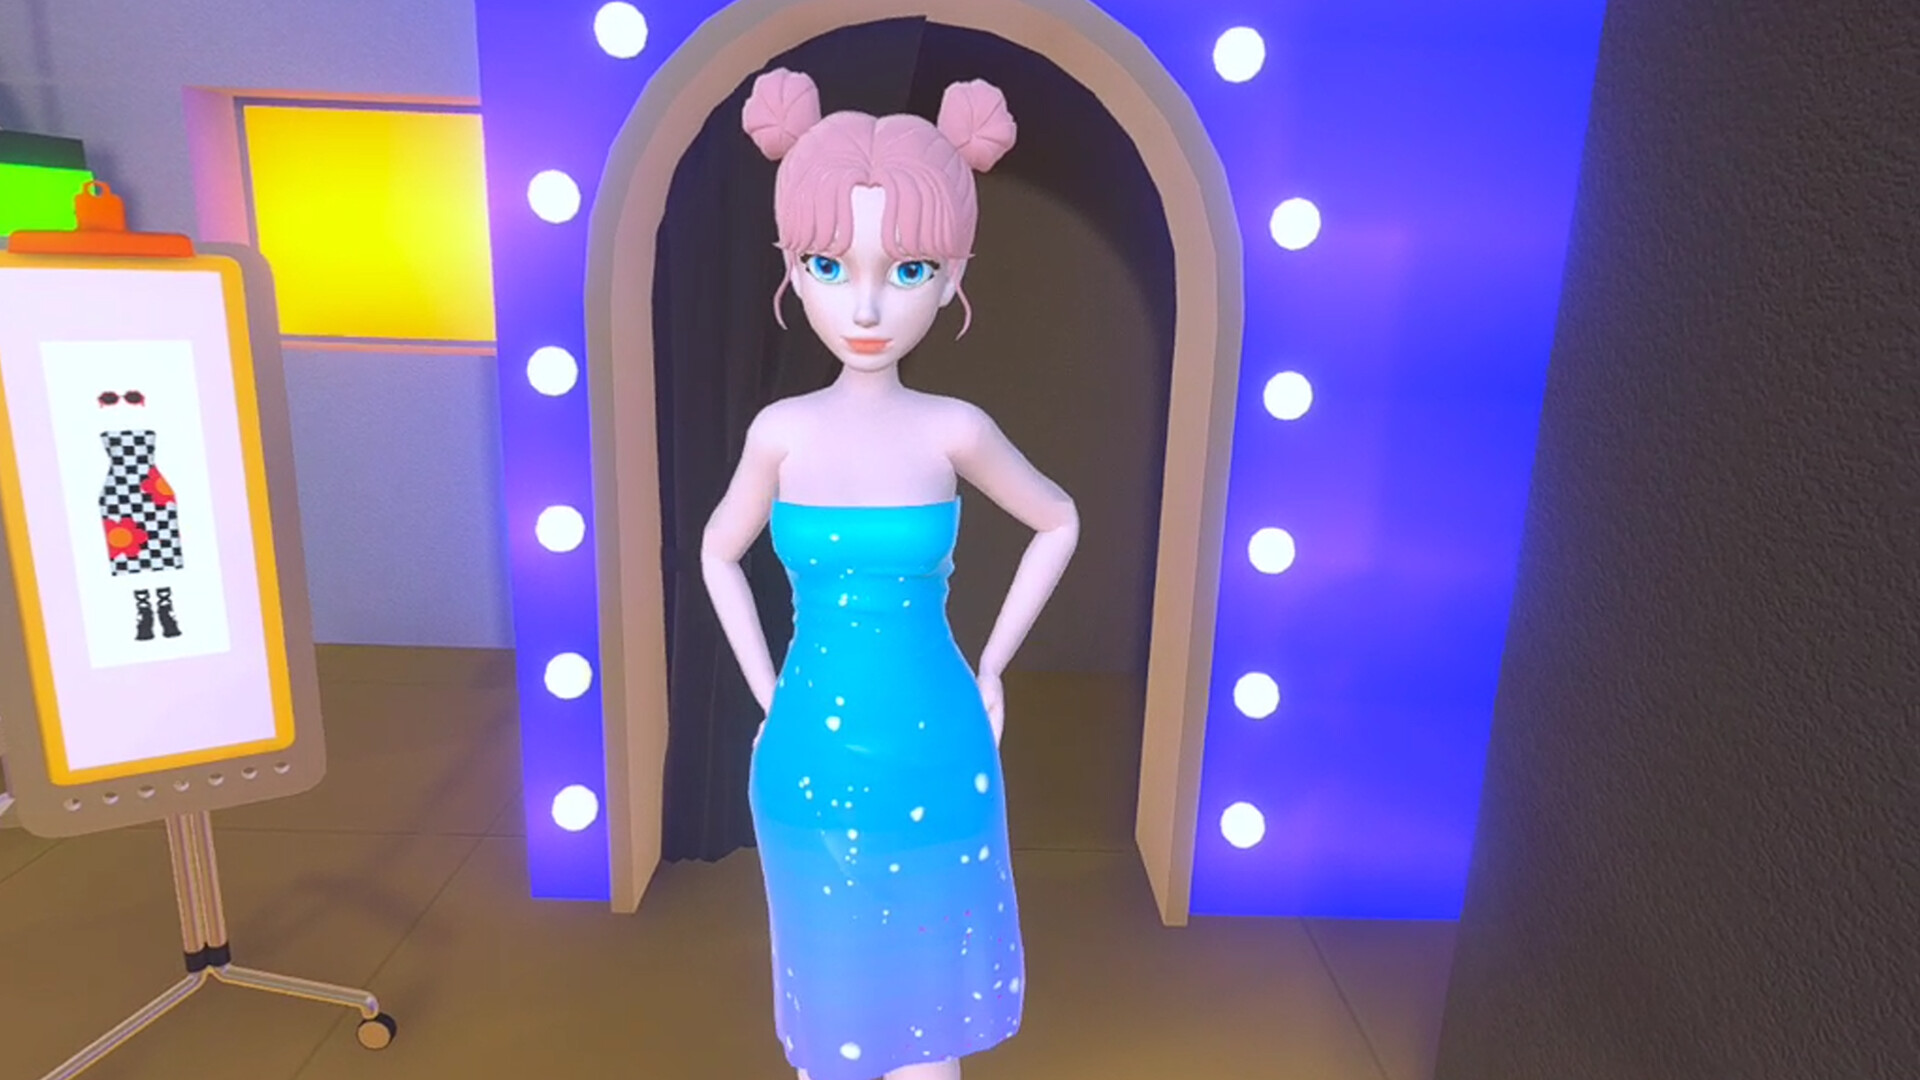 What's On Steam - Styling Shop VR